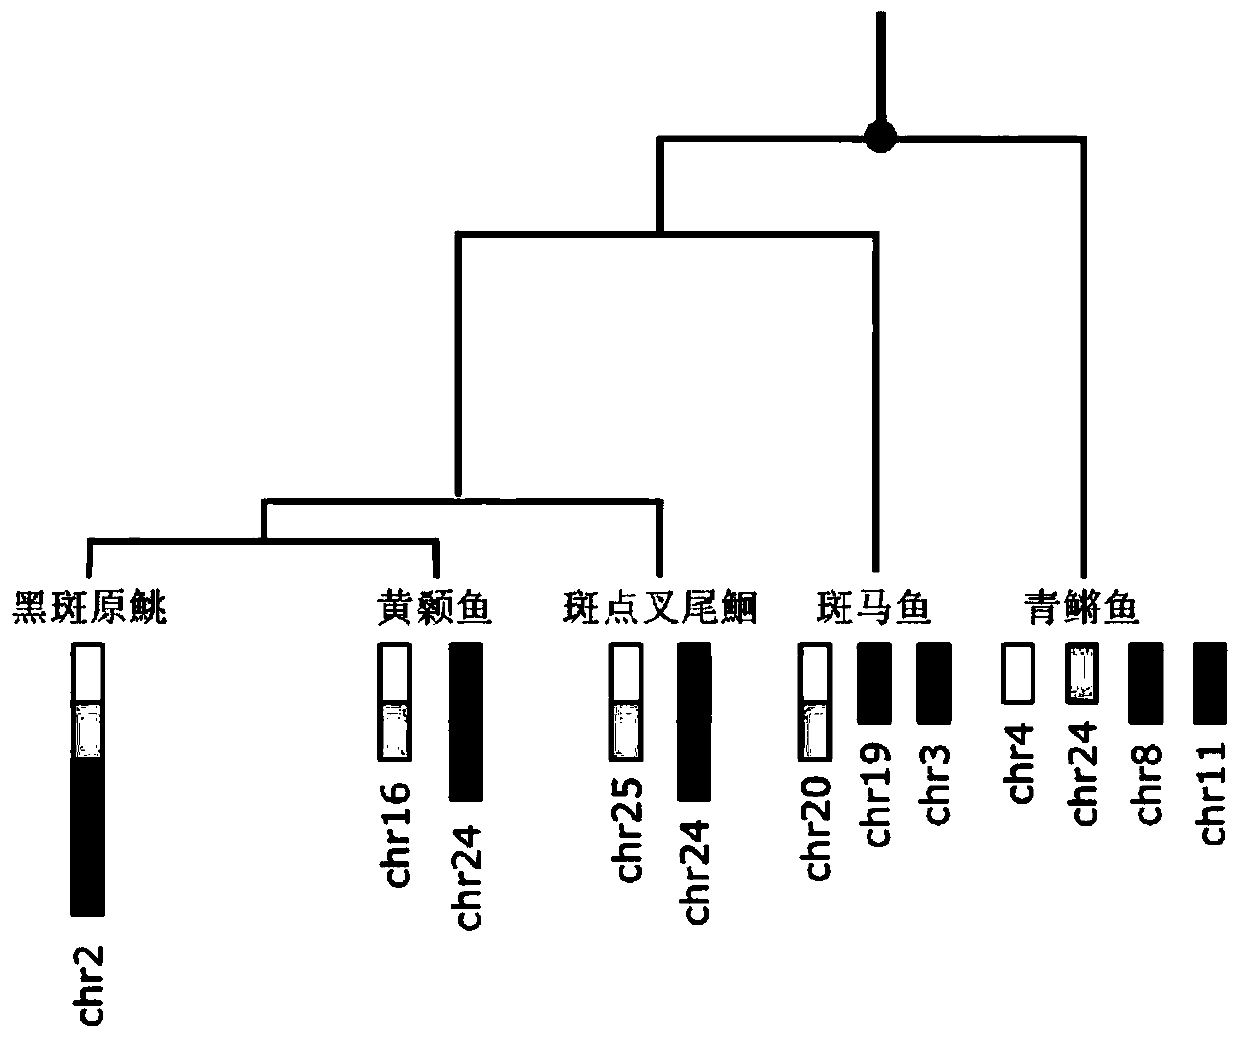 Method for comparative analysis of ancient chromosome evolution of sisoridae fishes